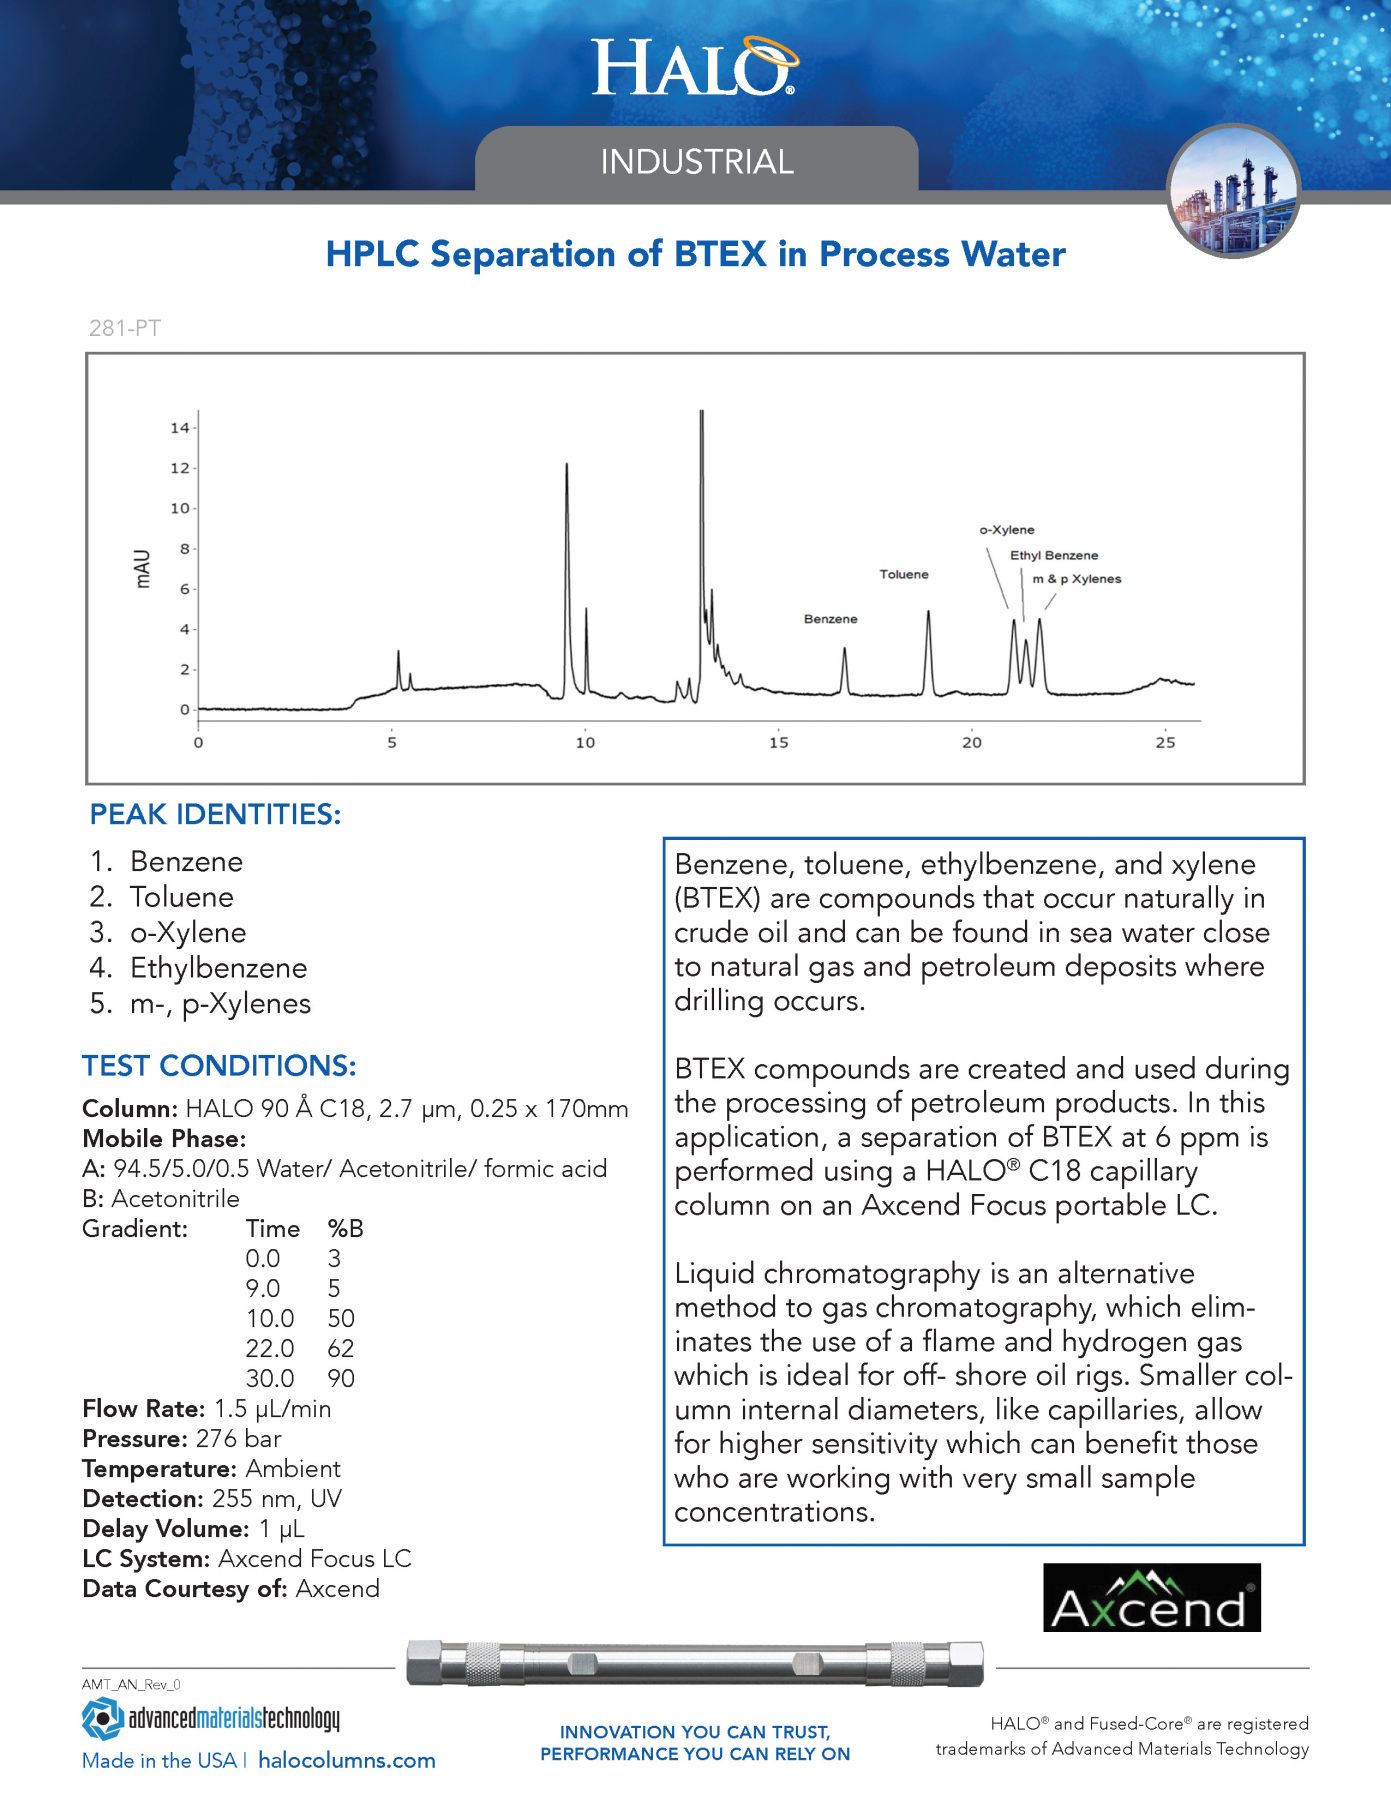 hplc separation of BTEX in process water - industrial chromatography